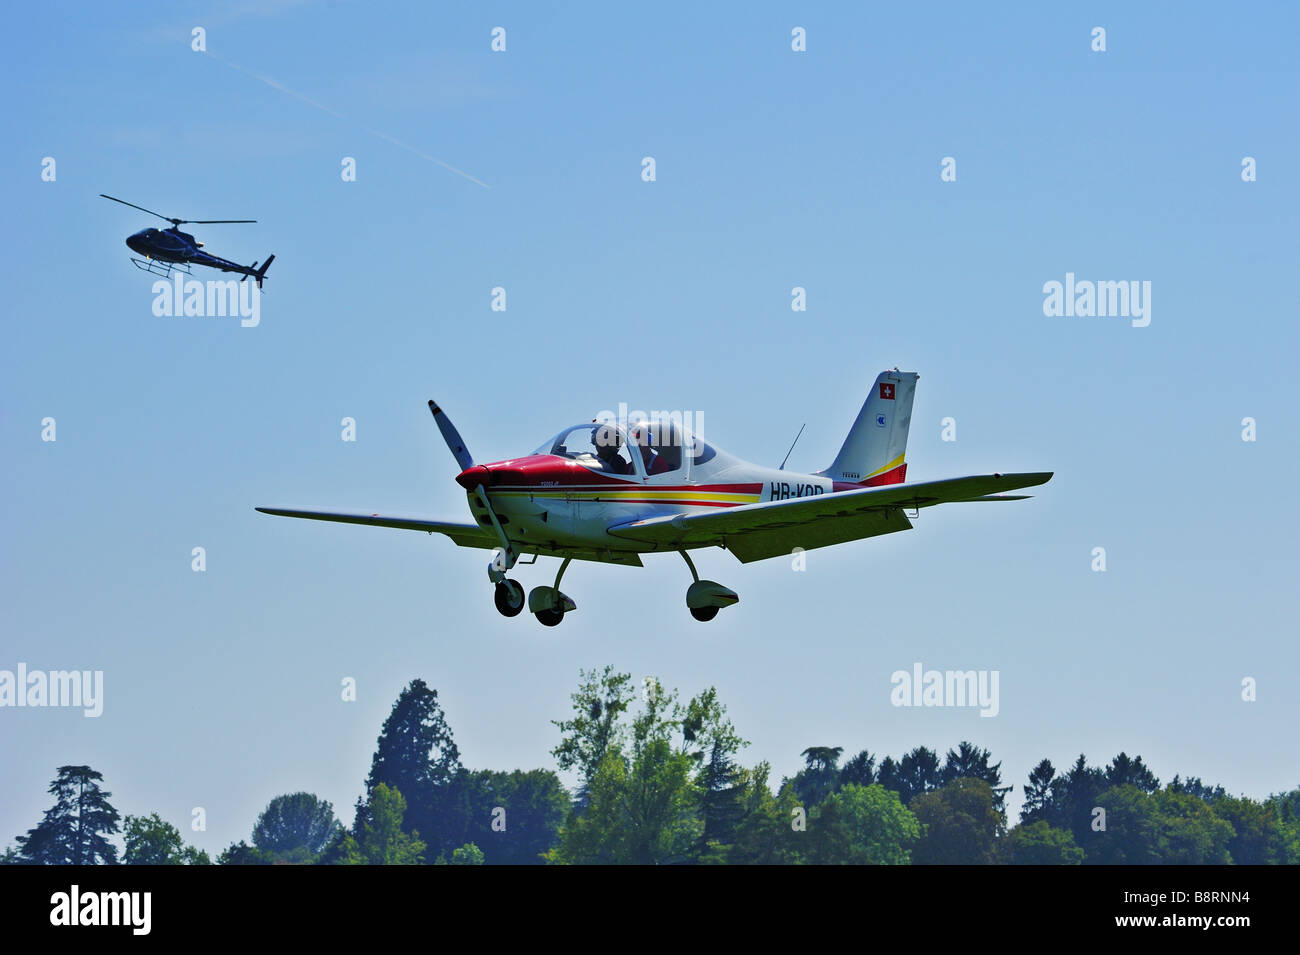 A light aircraft on inal approach, flaps down. Space for text in the sky. Stock Photo